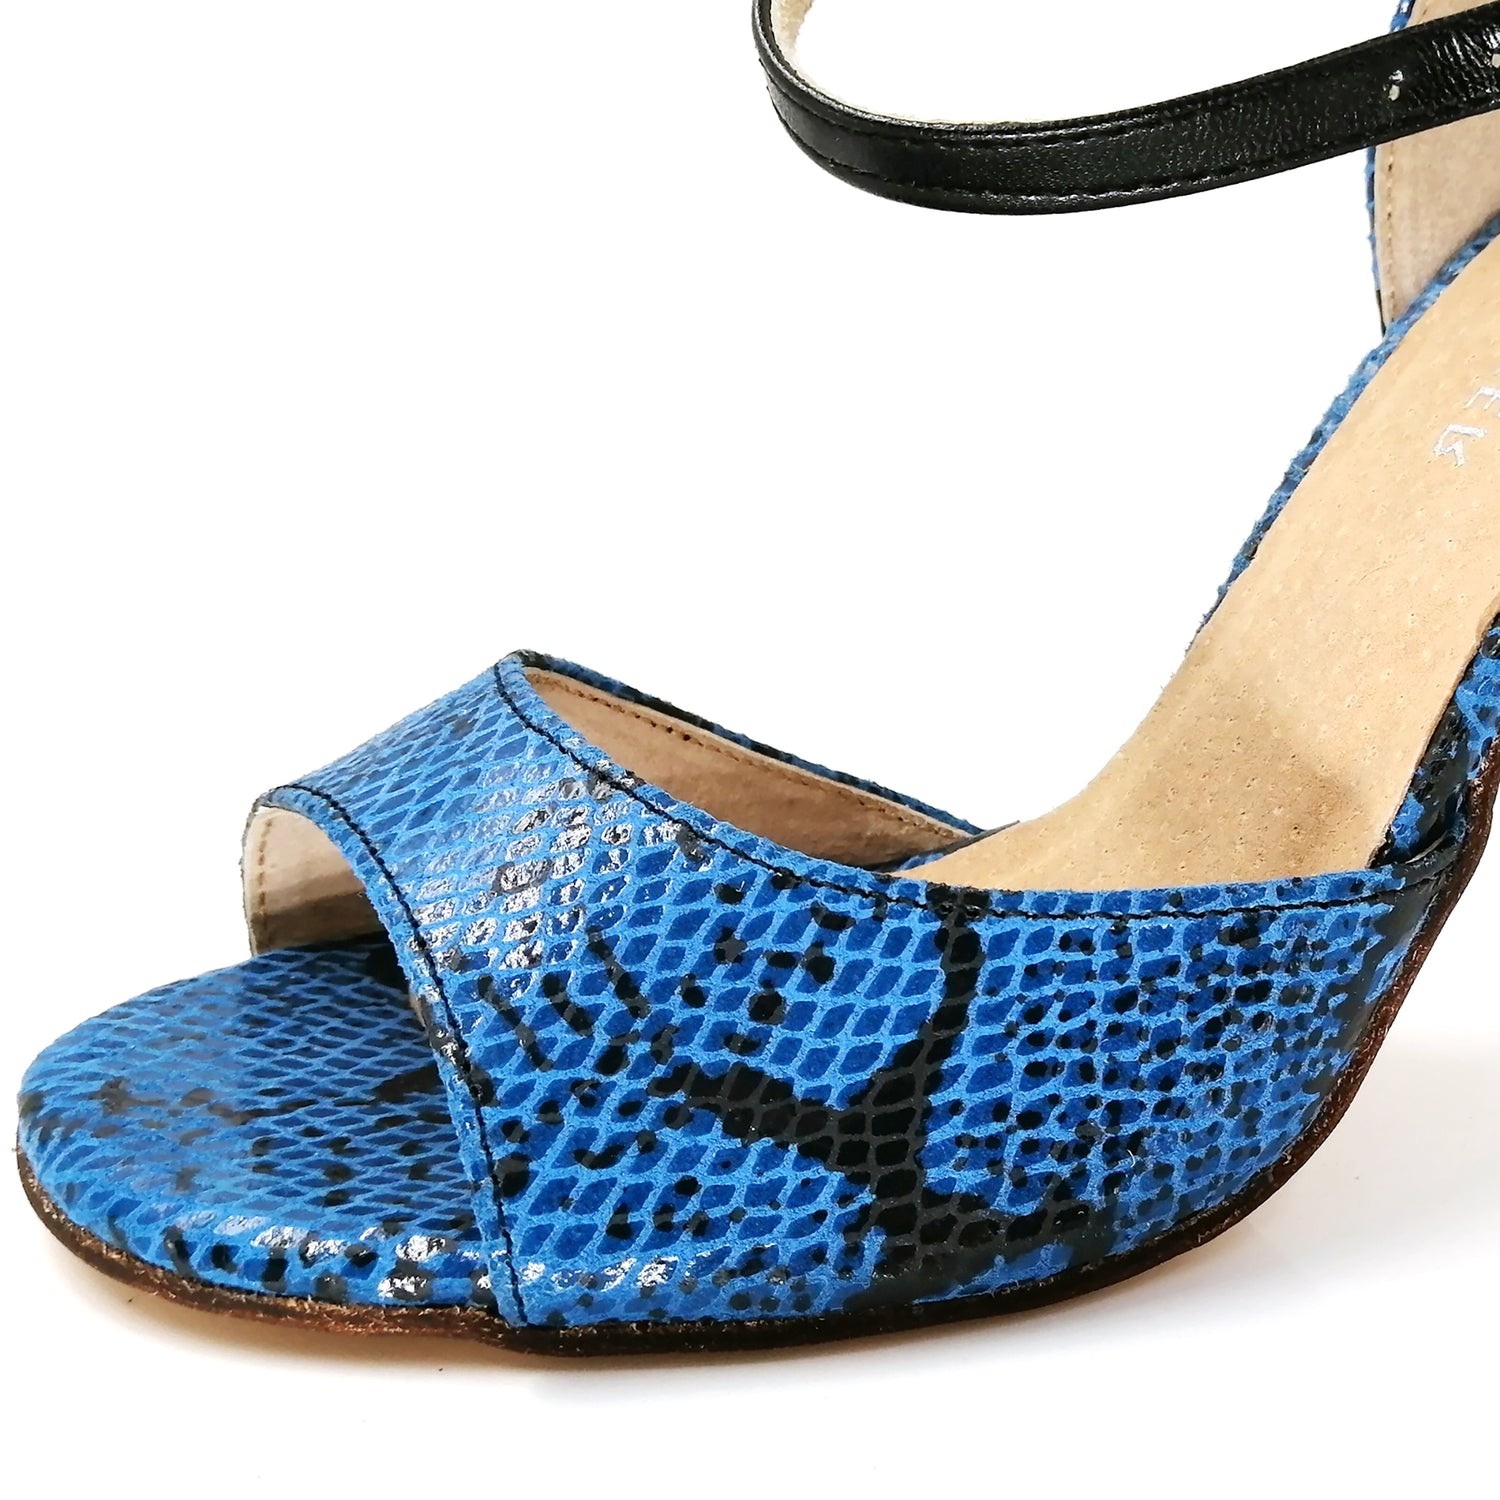 Pro Dancer Argentine Tango High Heel Sandals with Blue Leather Sole - PD-9001E3